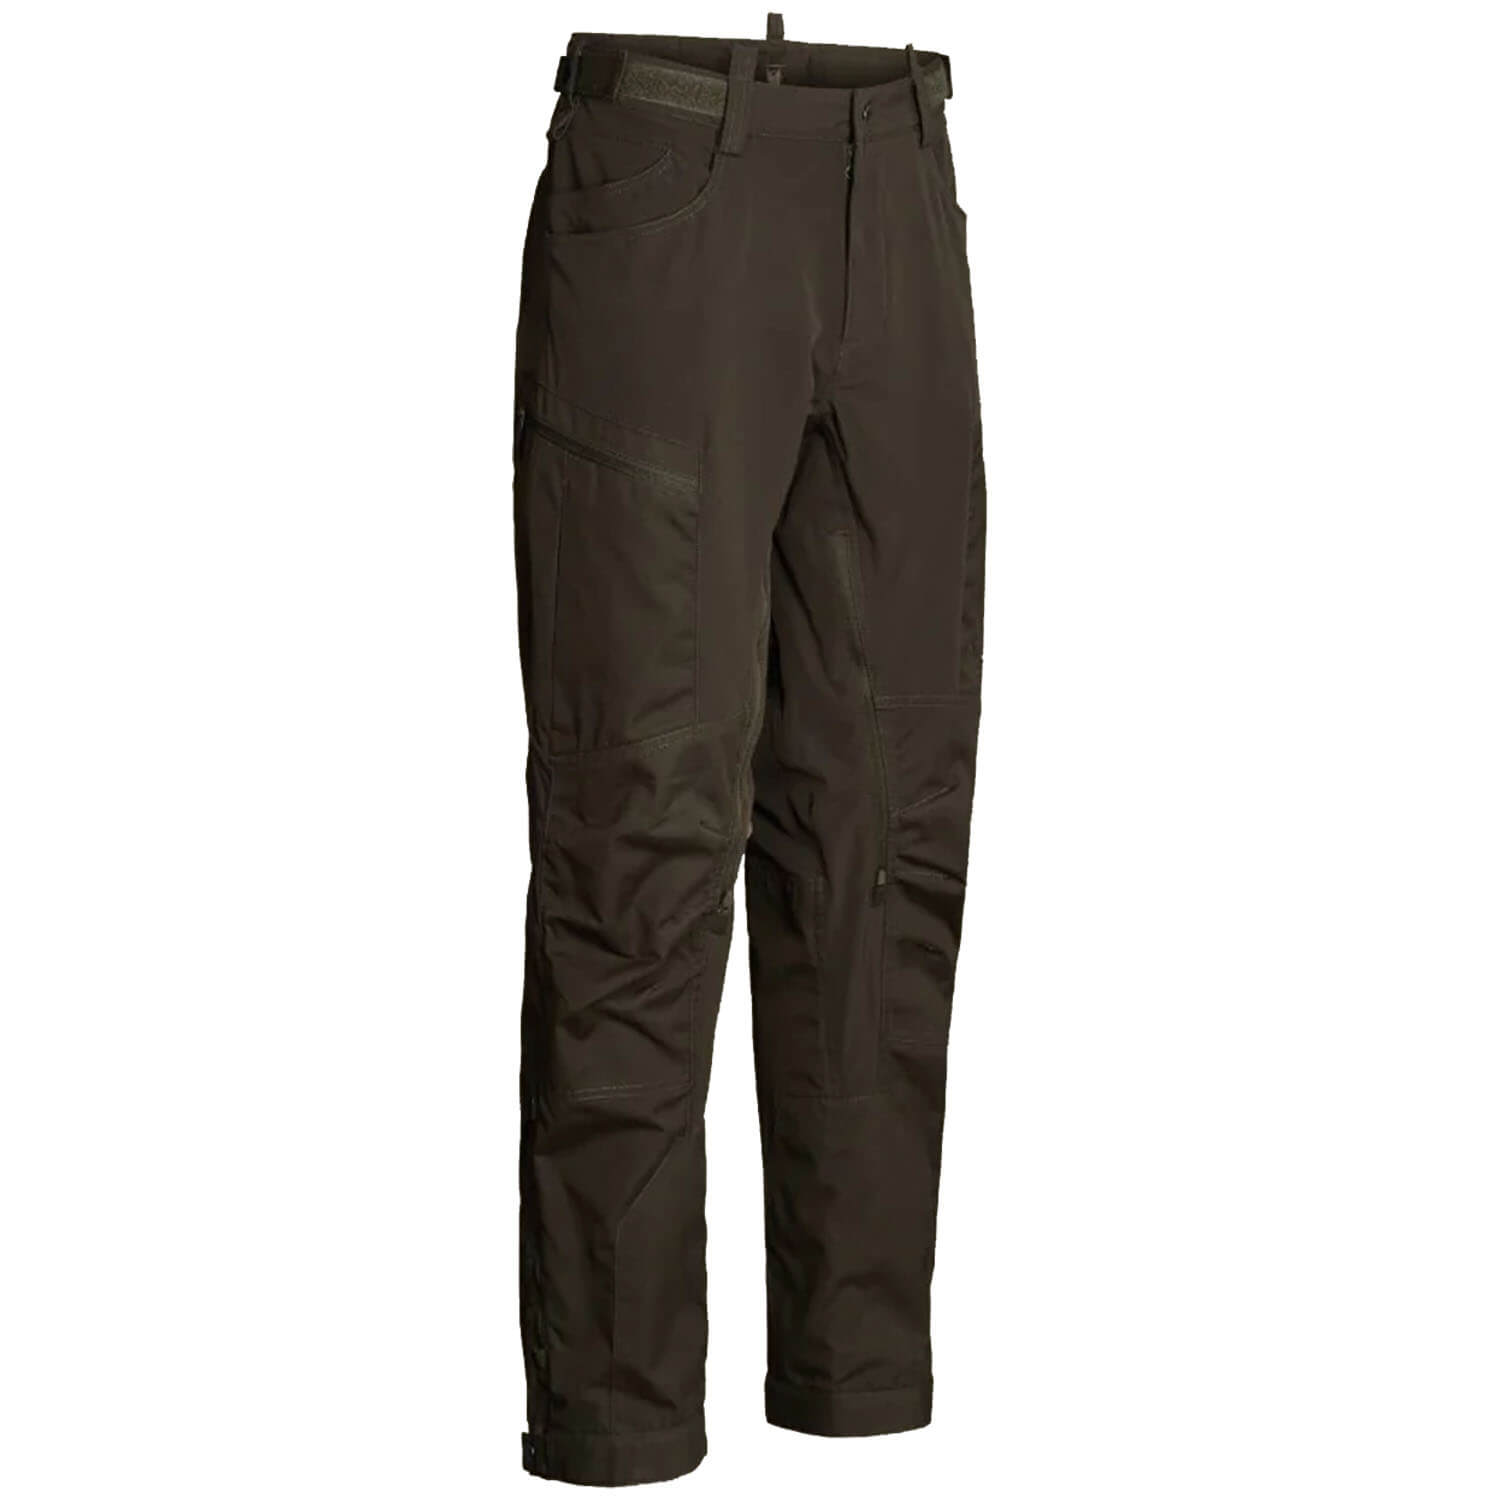 Northern Hunting trousers Trond Pro - Hunting Trousers